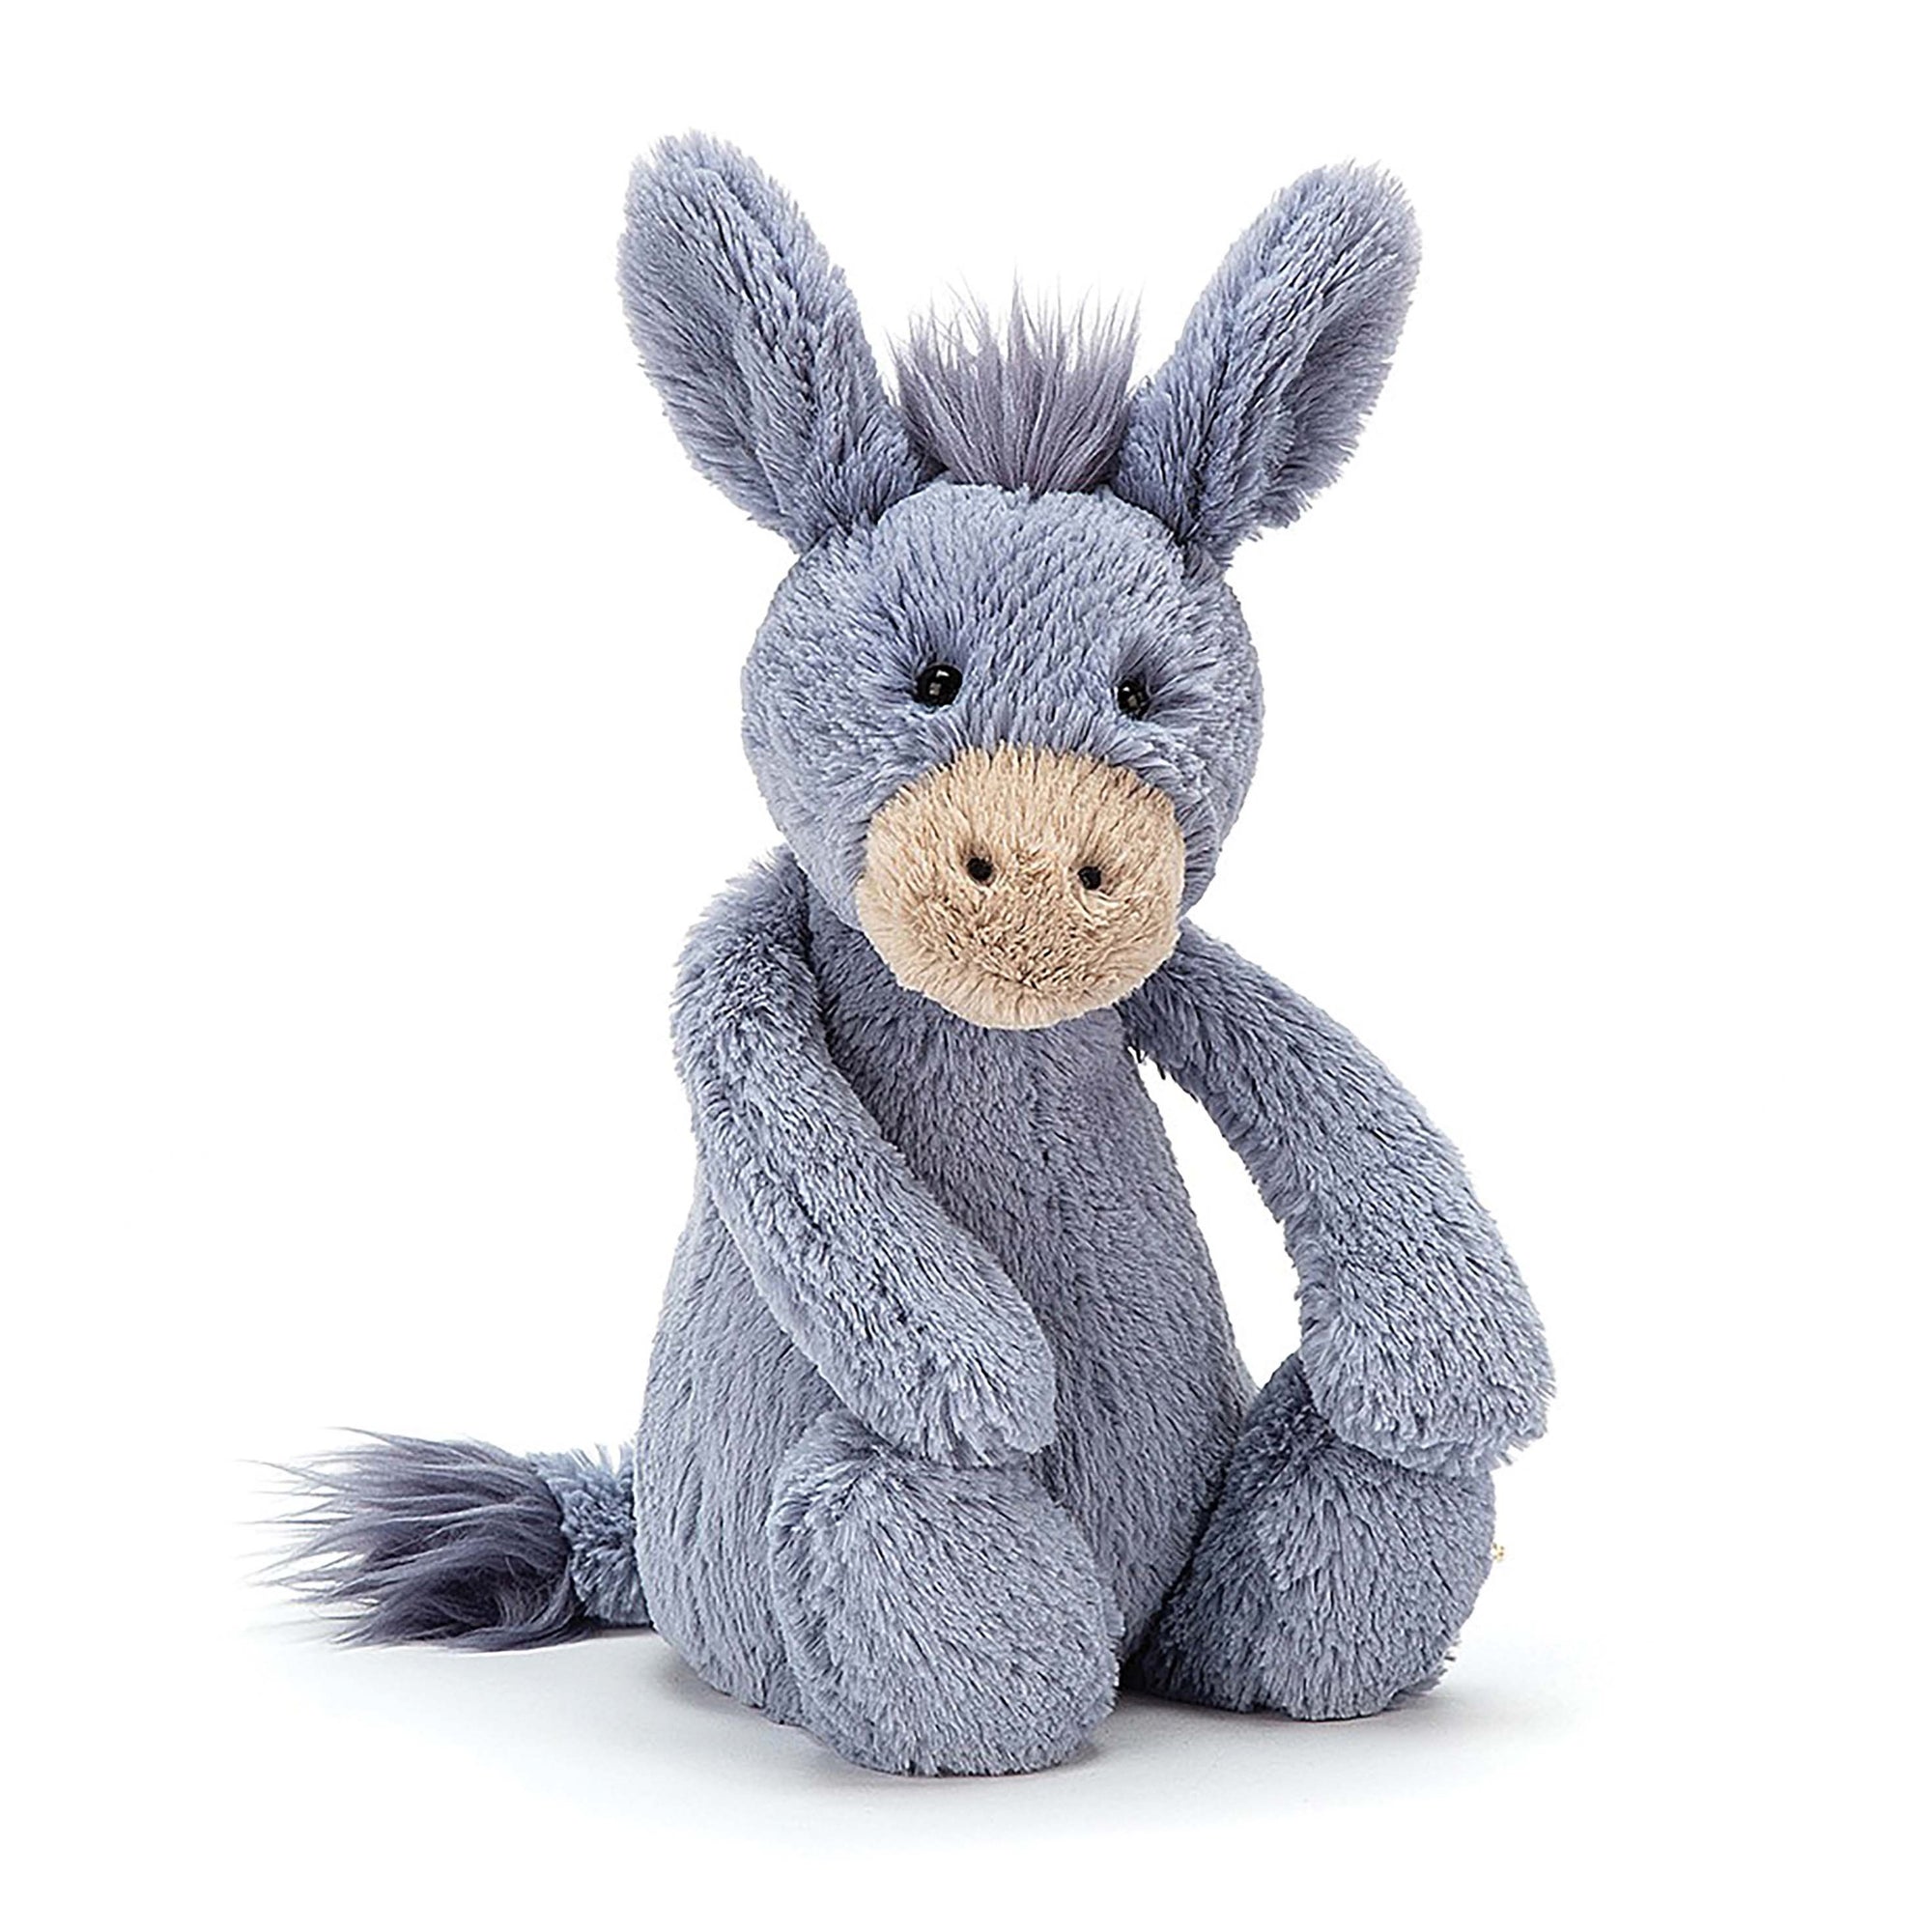 jellycat donkey - angus and dudley